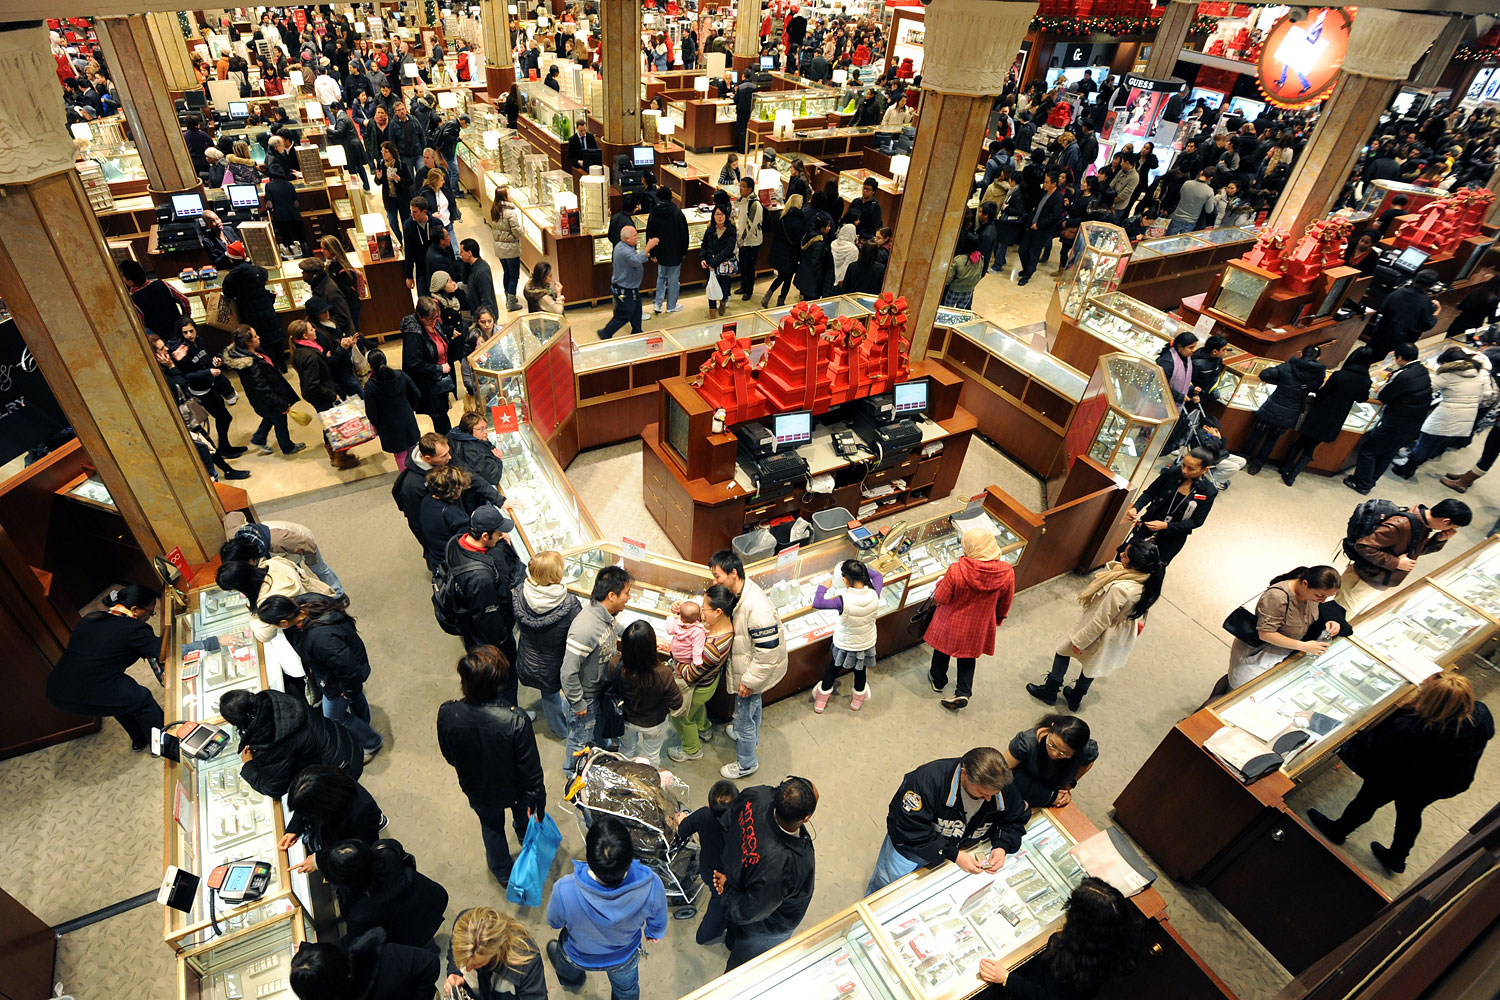 People crowd the aisles inside Macy's department store on Nov. 25, 2011 in New York after the midnight opening to begin the "Black Friday" shopping weekend. (Stan Honda—AFP/Getty Images)